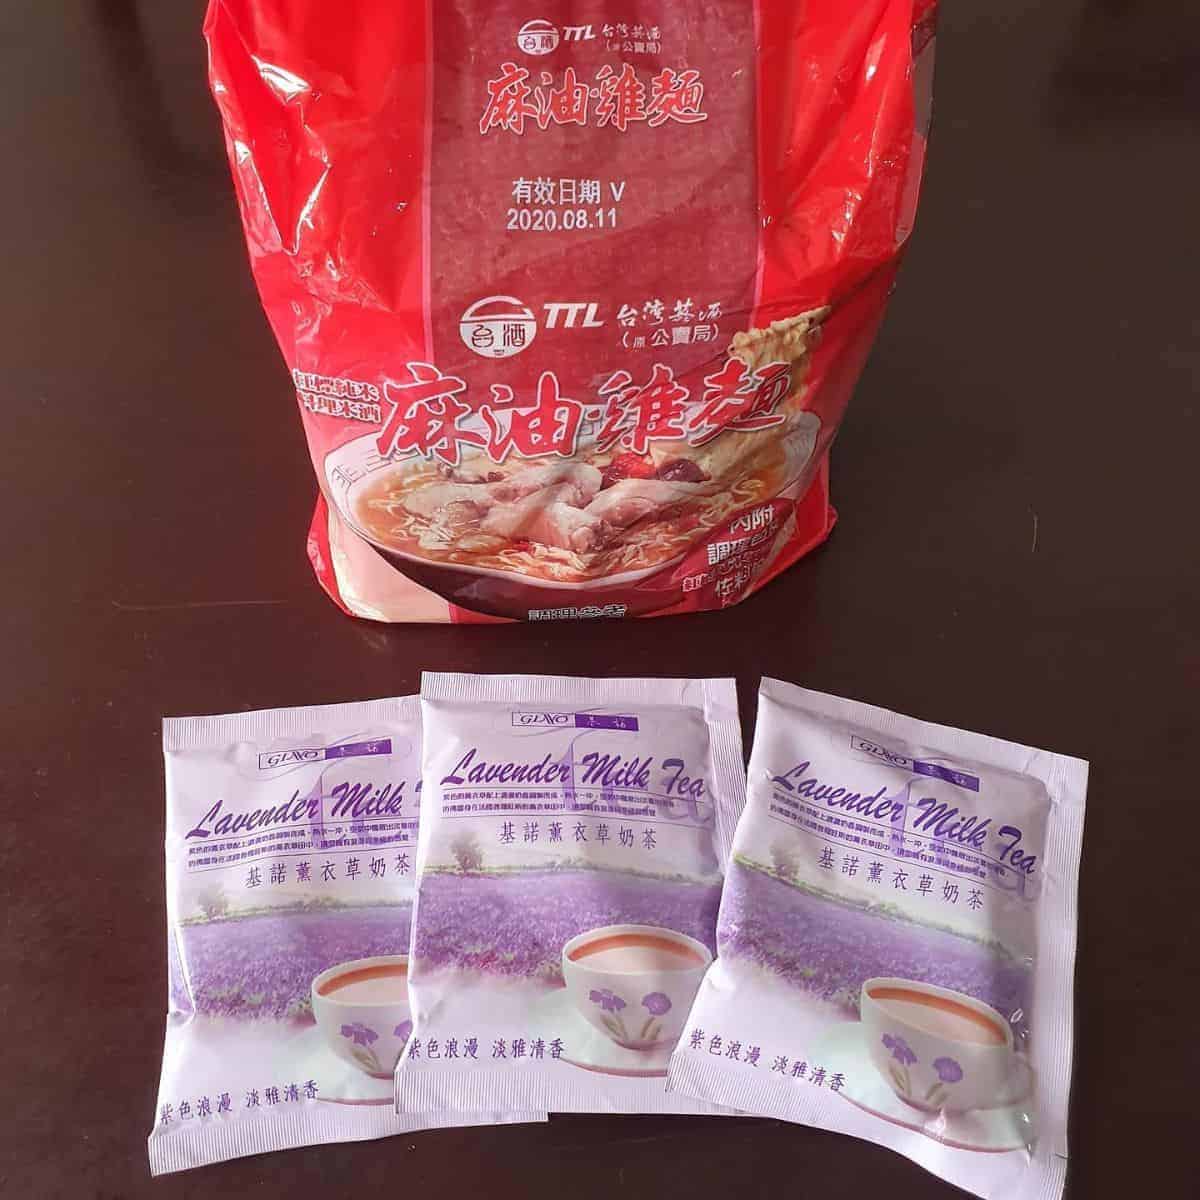 Three sachets of lavender flavoured mix from Gino